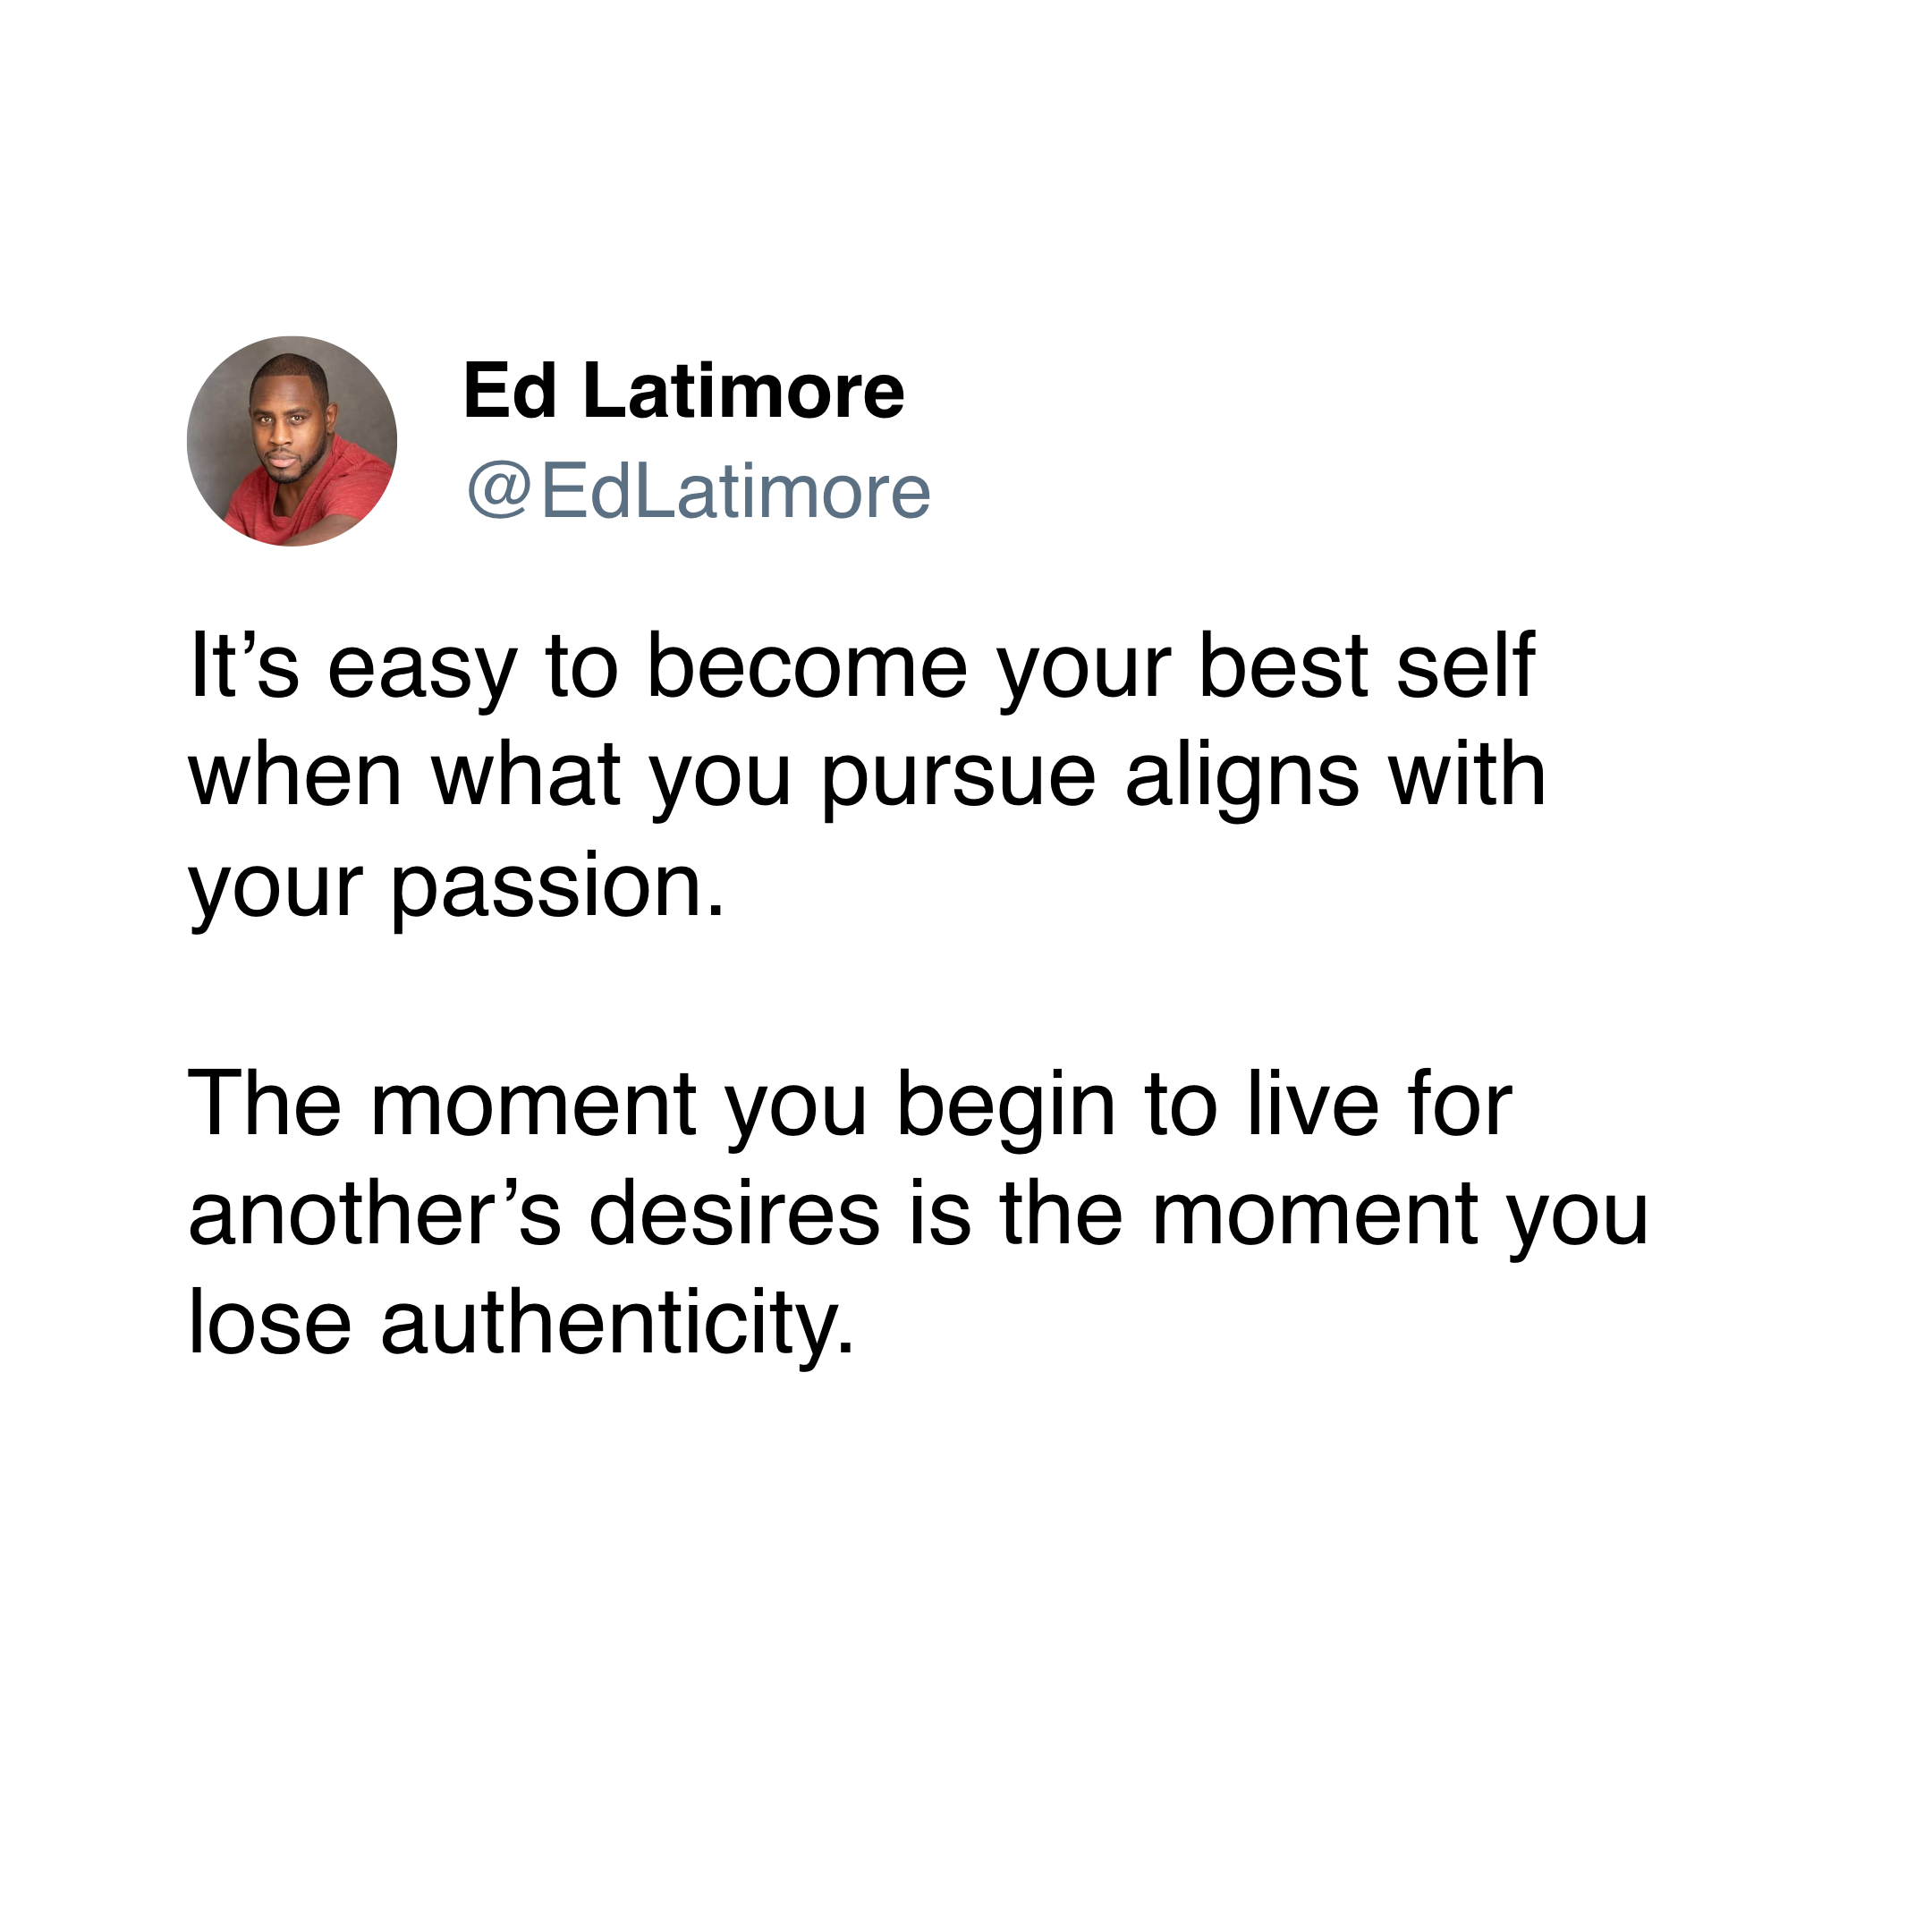 ed latimore authenticity authenticity quotes "authenticity is easy living with passion"